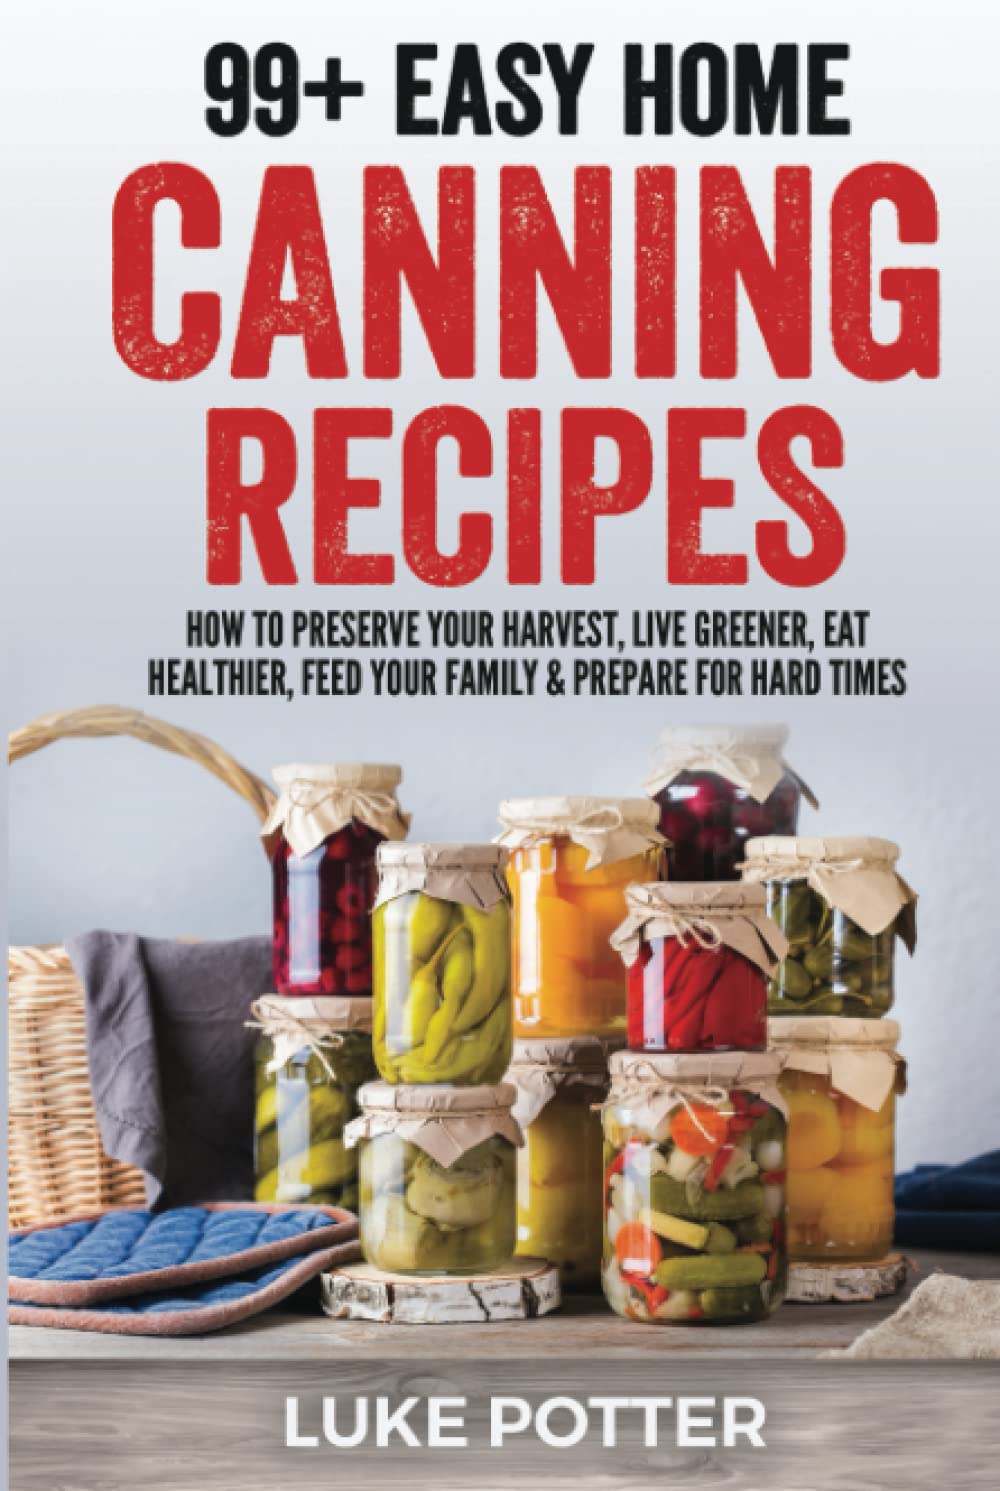 99+ Easy Home Canning Recipes: How to Preserve Your Harvest, Live Greener, Eat Healthier, Feed Your Family & Prepare for Hard Times (The Urban Farmer Series)